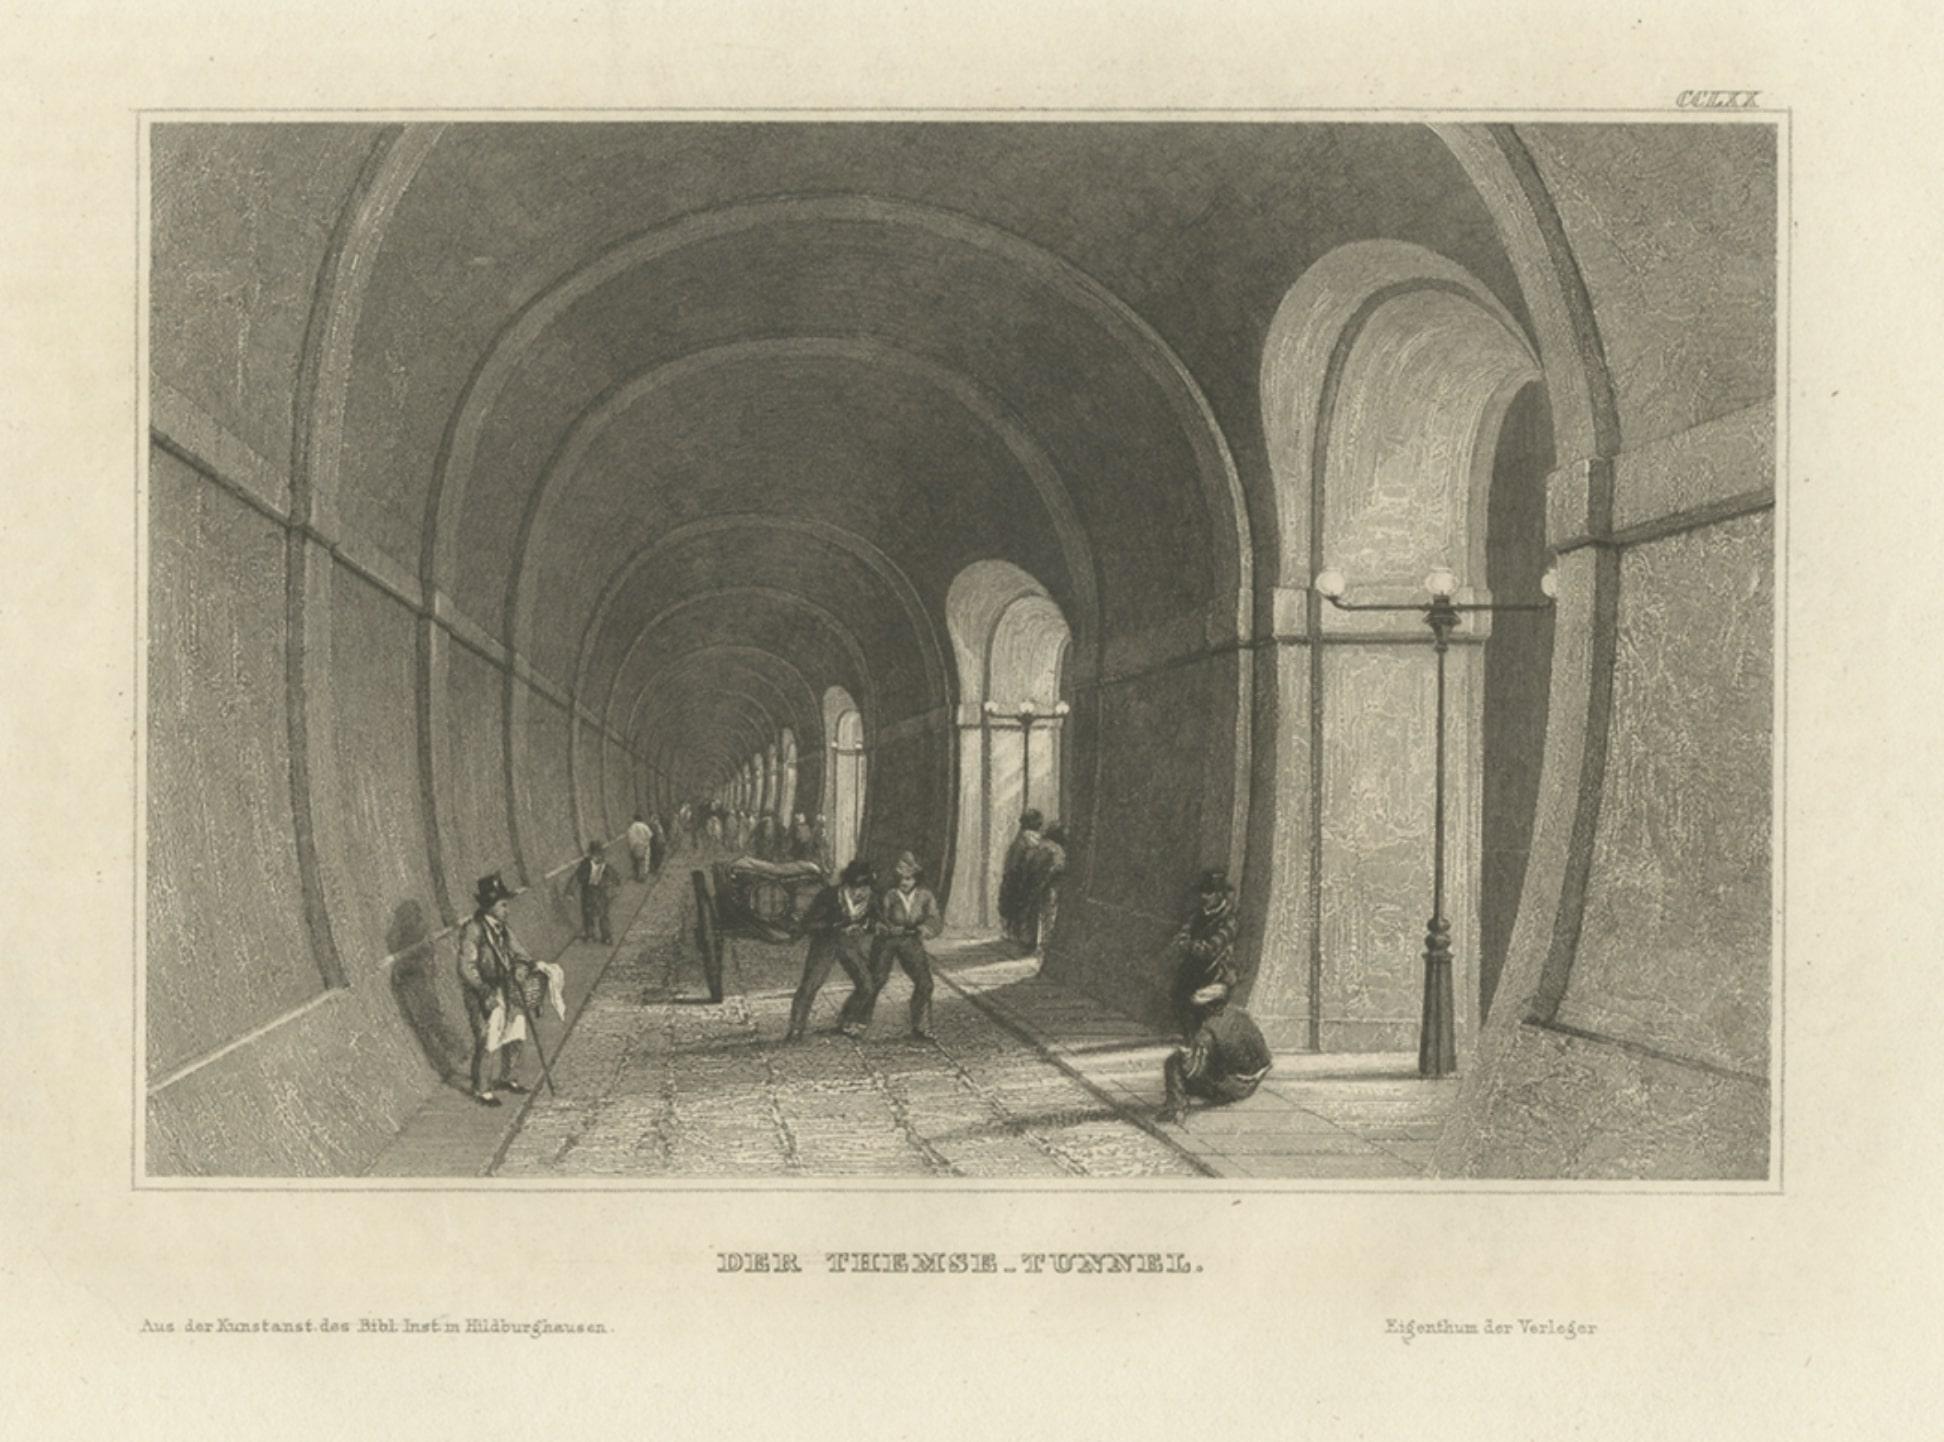 Antique print titled 'Der Themse-Tunnel'. 

View of the Thames Tunnel, a tunnel beneath the River Thames in London, connecting Rotherhithe and Wapping. Originates from 'Meyers Universum'. 

Artists and Engravers: Joseph Meyer (May 9, 1796 - June